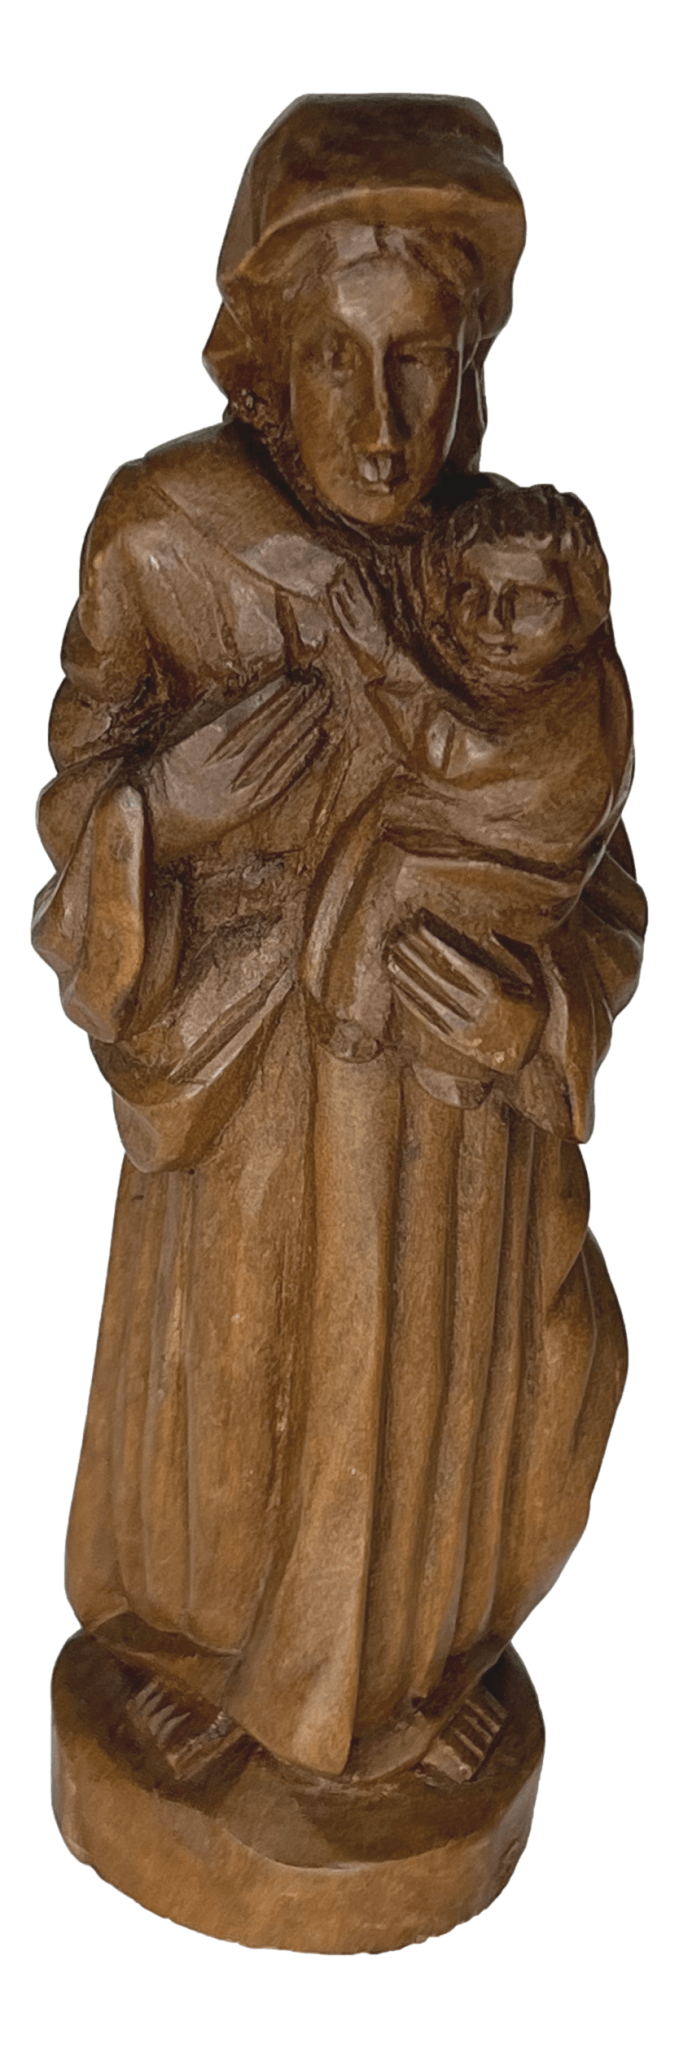 Statue Madonna and Child Handcarved Wood Handmade By Local El Paso Artist H: 6.5 inches - Ysleta Mission Gift Shop- VOTED El Paso's Best Gift Shop